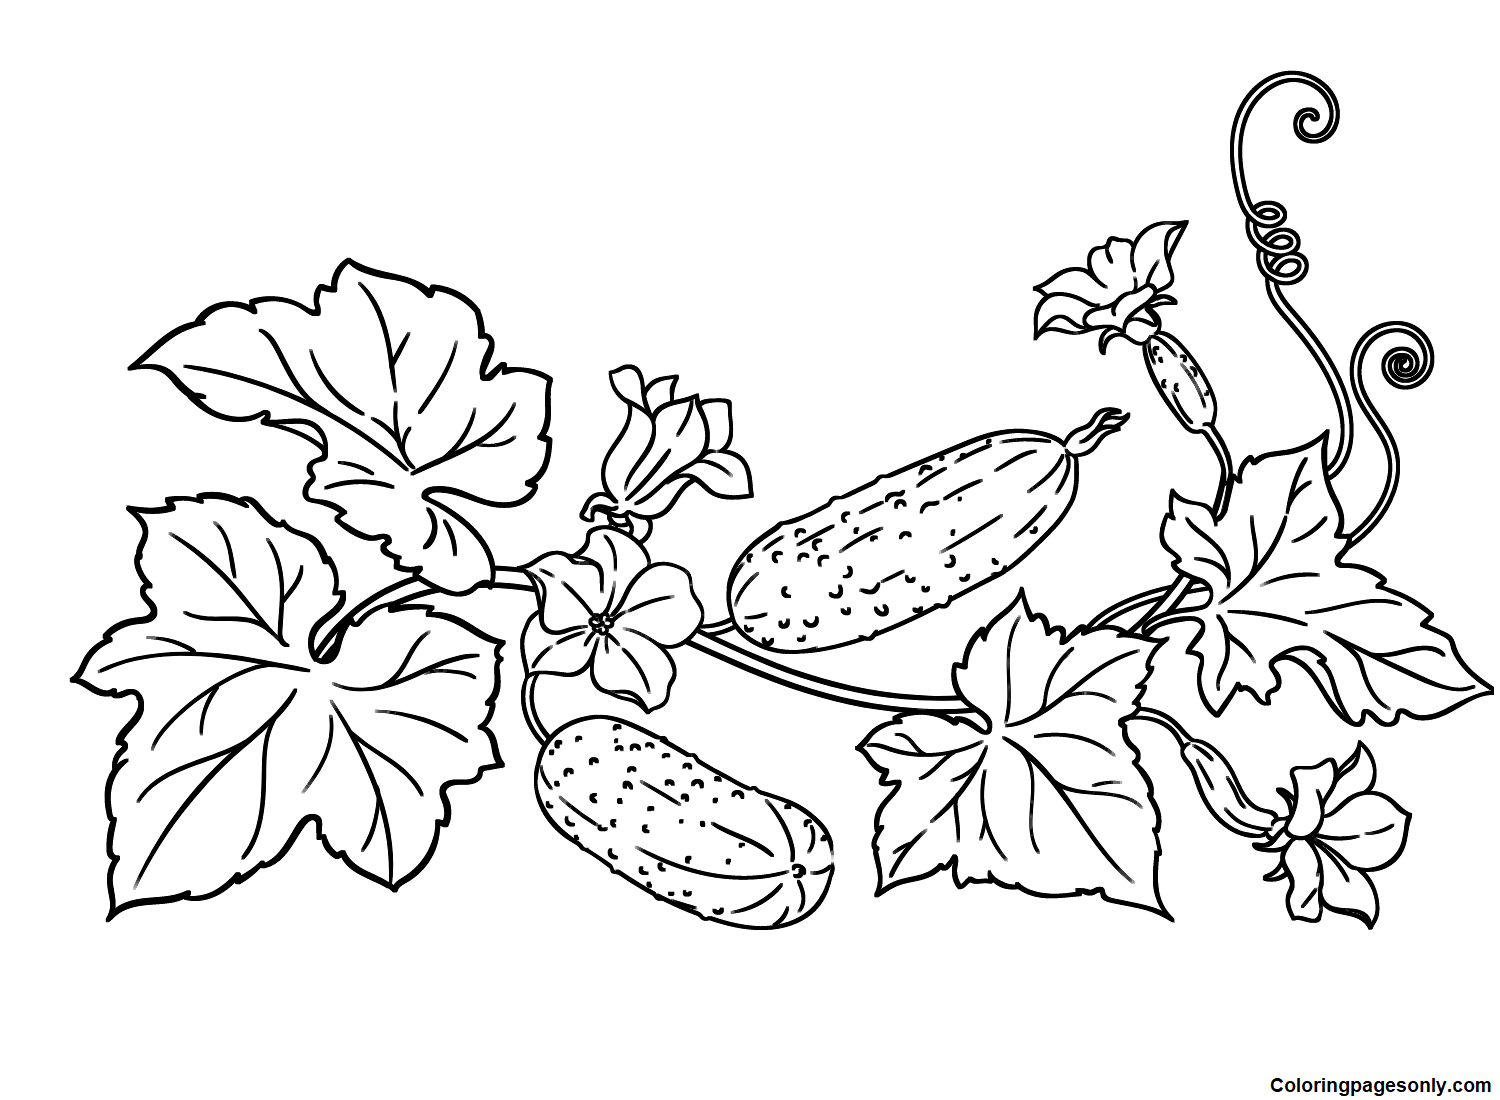 Cucumber Plant Coloring Page